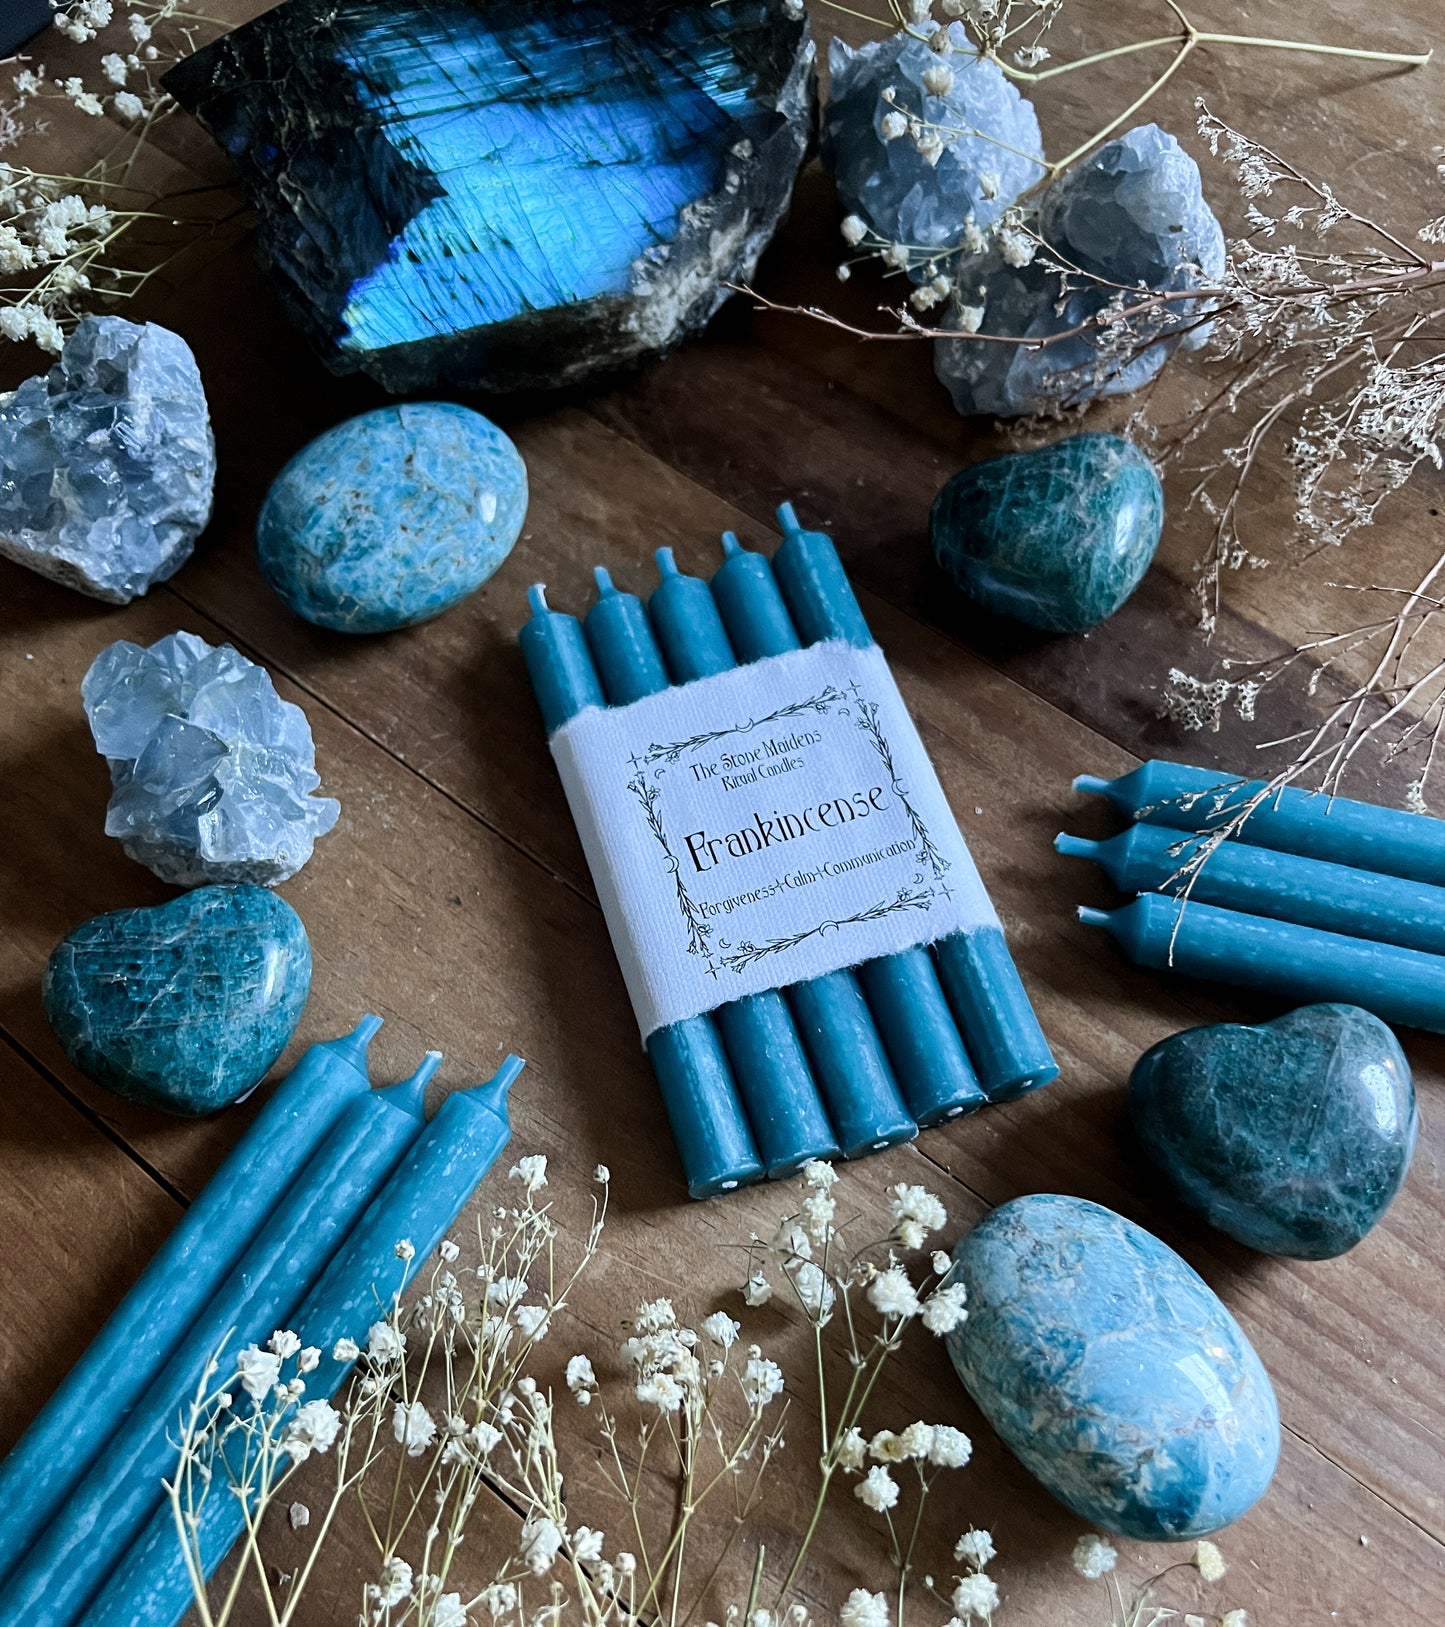 Light Blue Frankincense chime candles arranged on a dark wooden altar surrounded by crystals, sold at The Stone Maidens